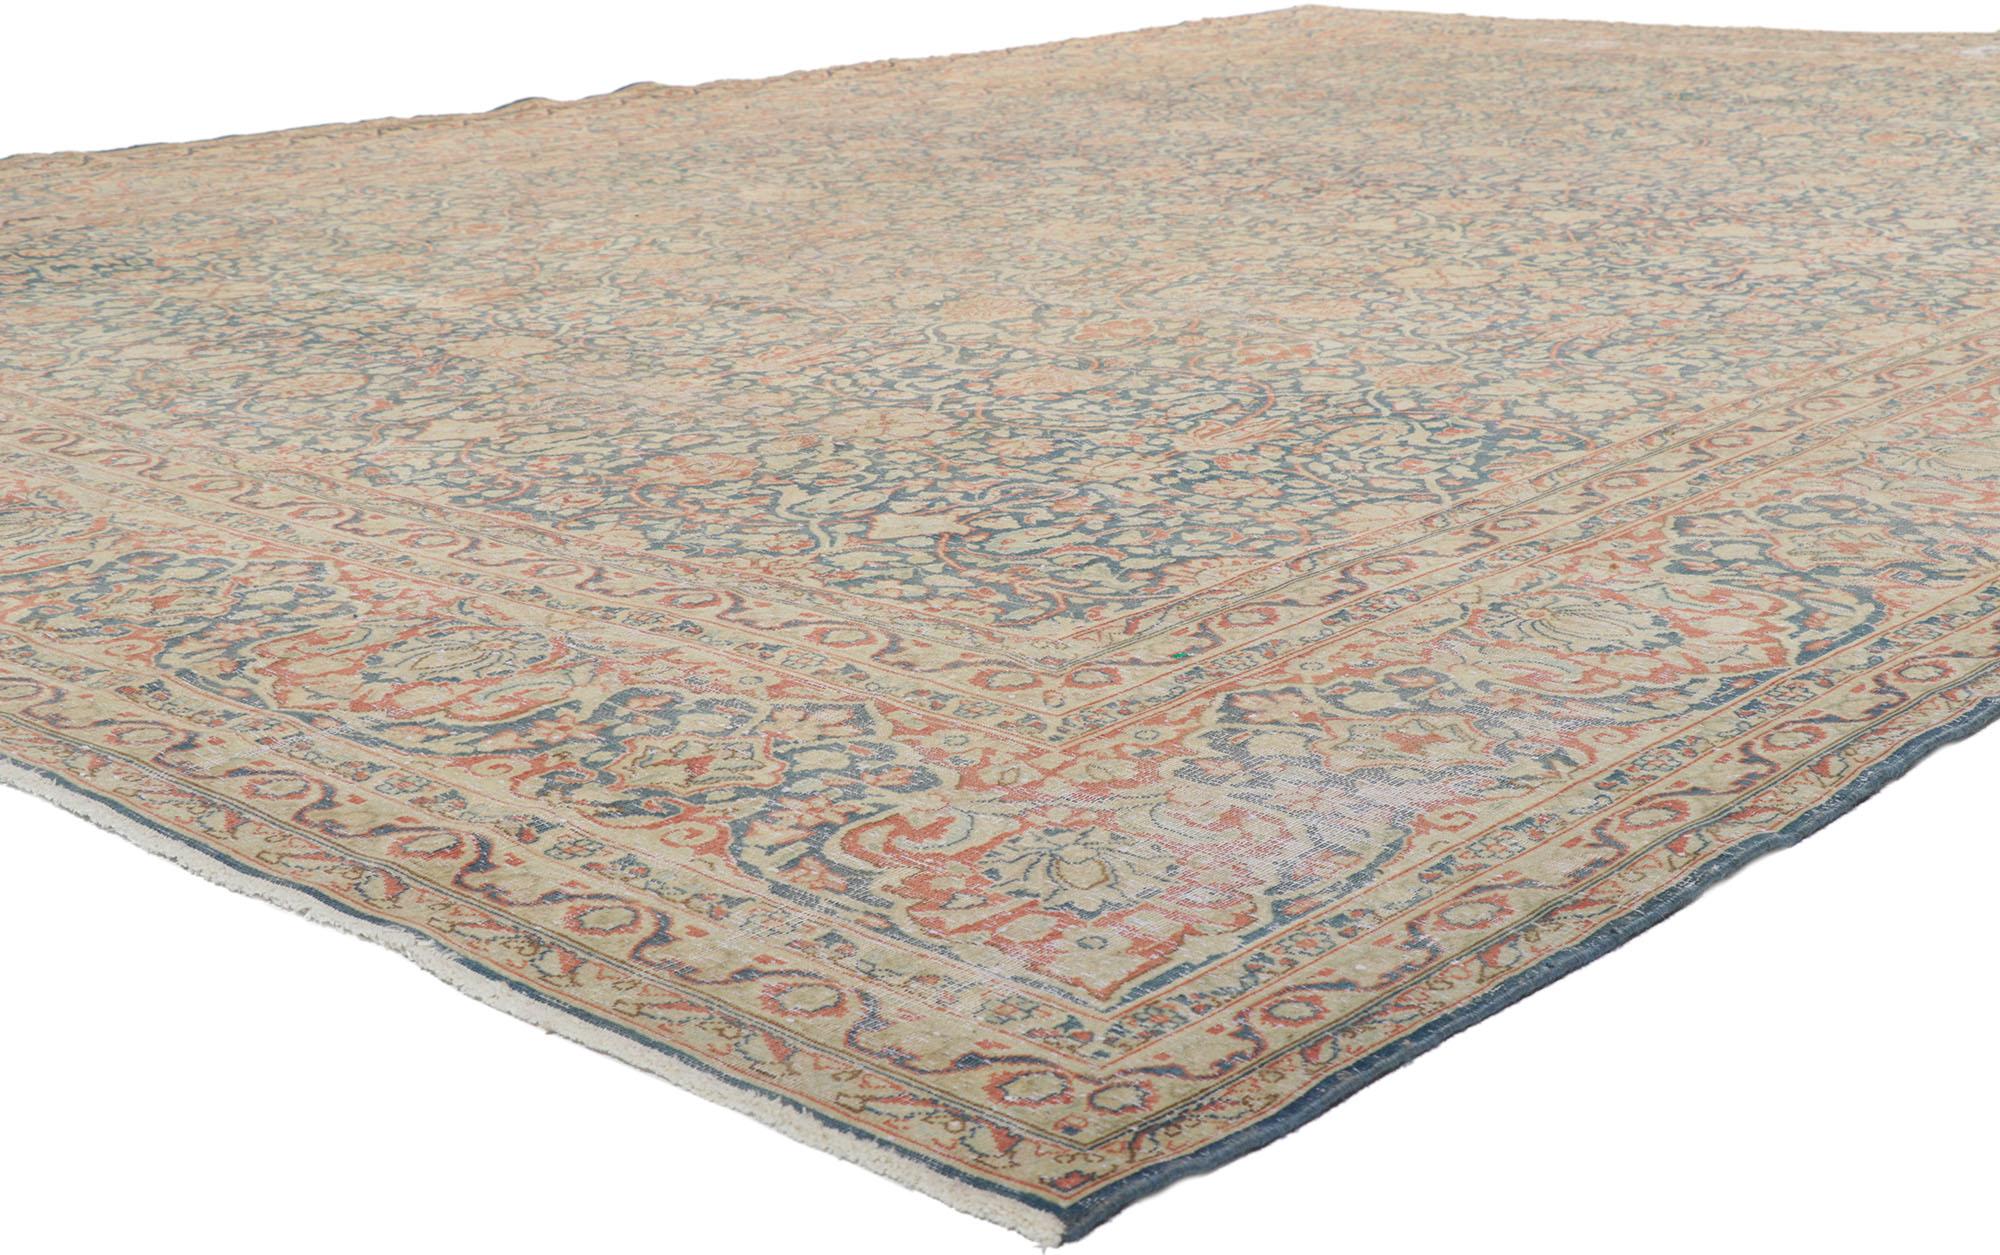 61024 Antique Persian Kerman rug, 11'03 x 16'04.
Distressed. Desirable age wear. Antique wash. Abrash. Hand-knotted wool. Made in Iran.
 